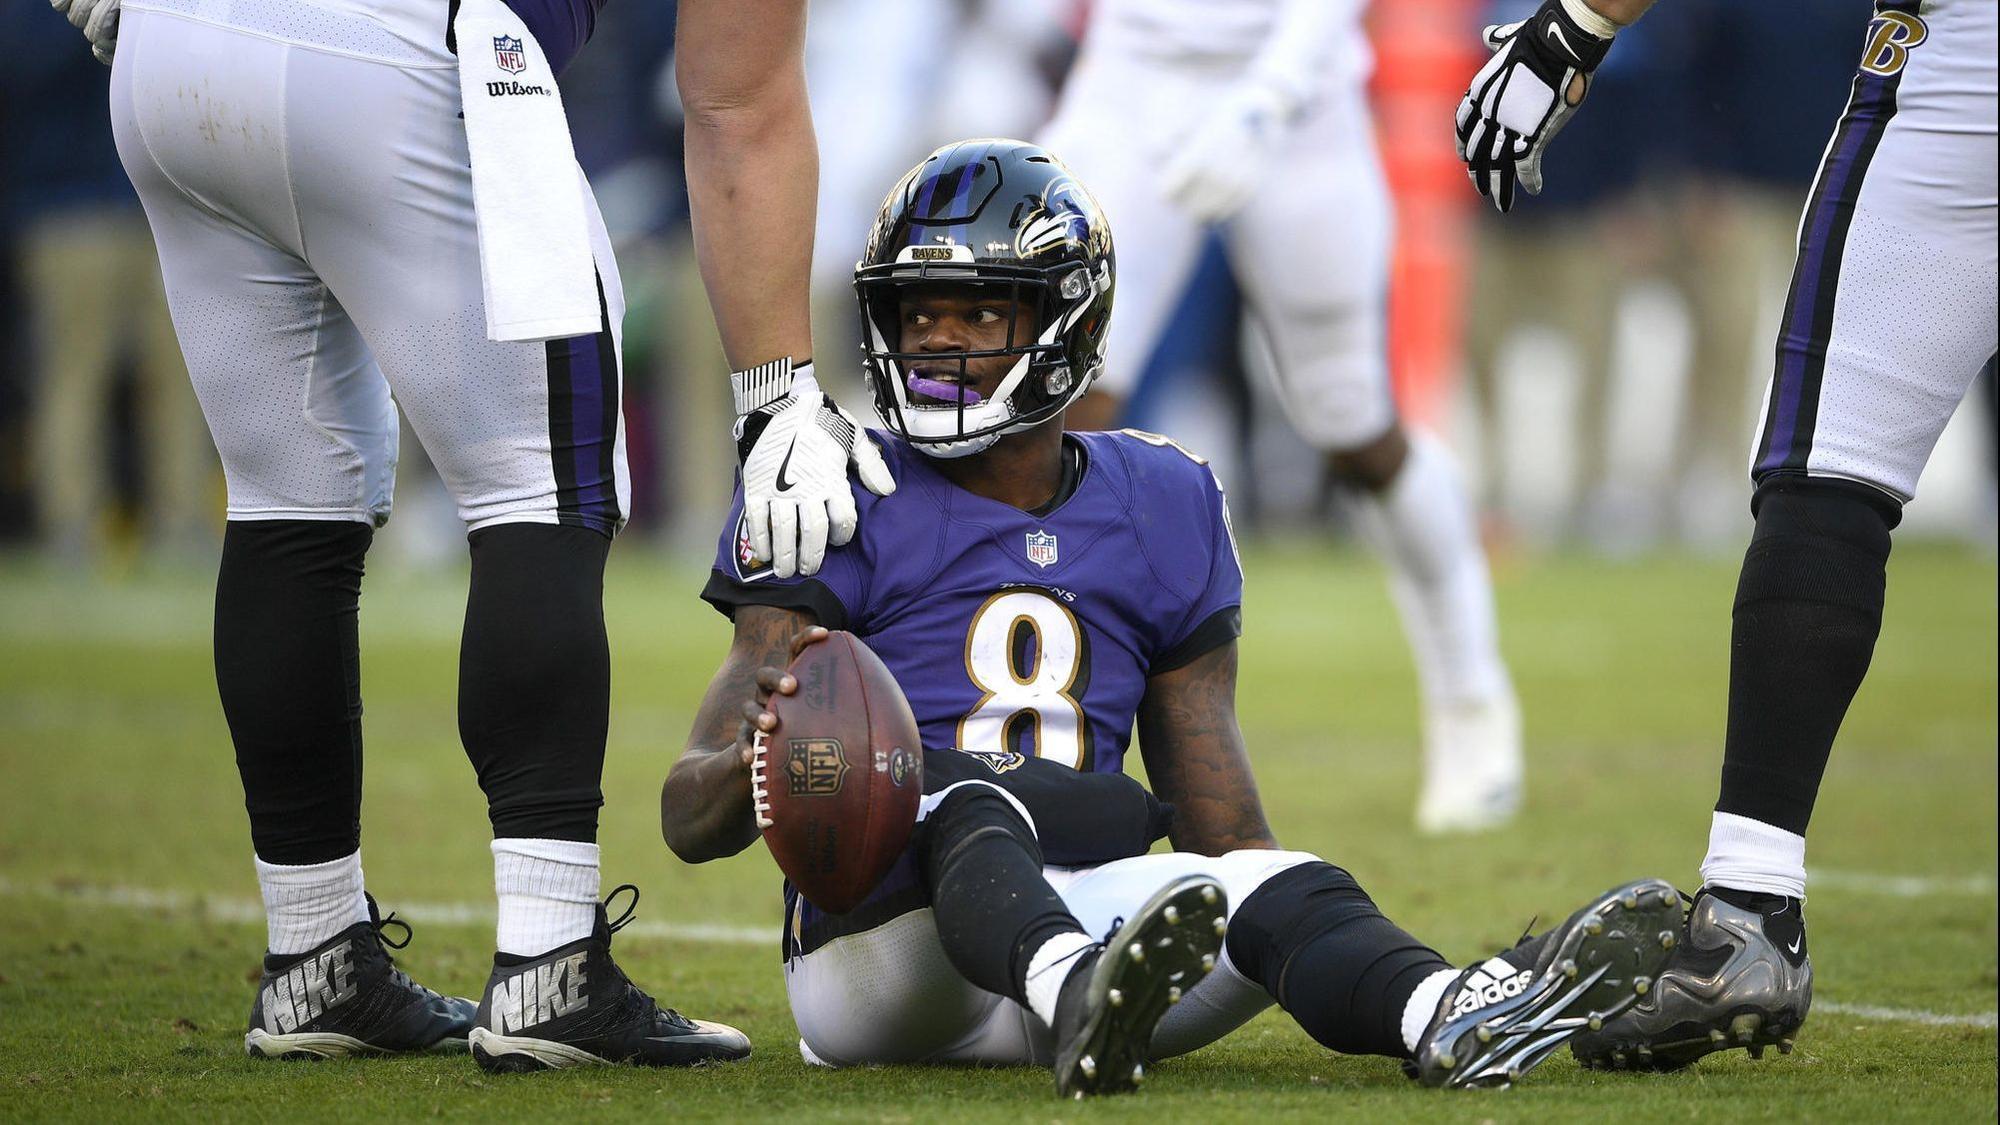 Preston: Ravens have hitched their future to Lamar Jackson, who's promising but still ...